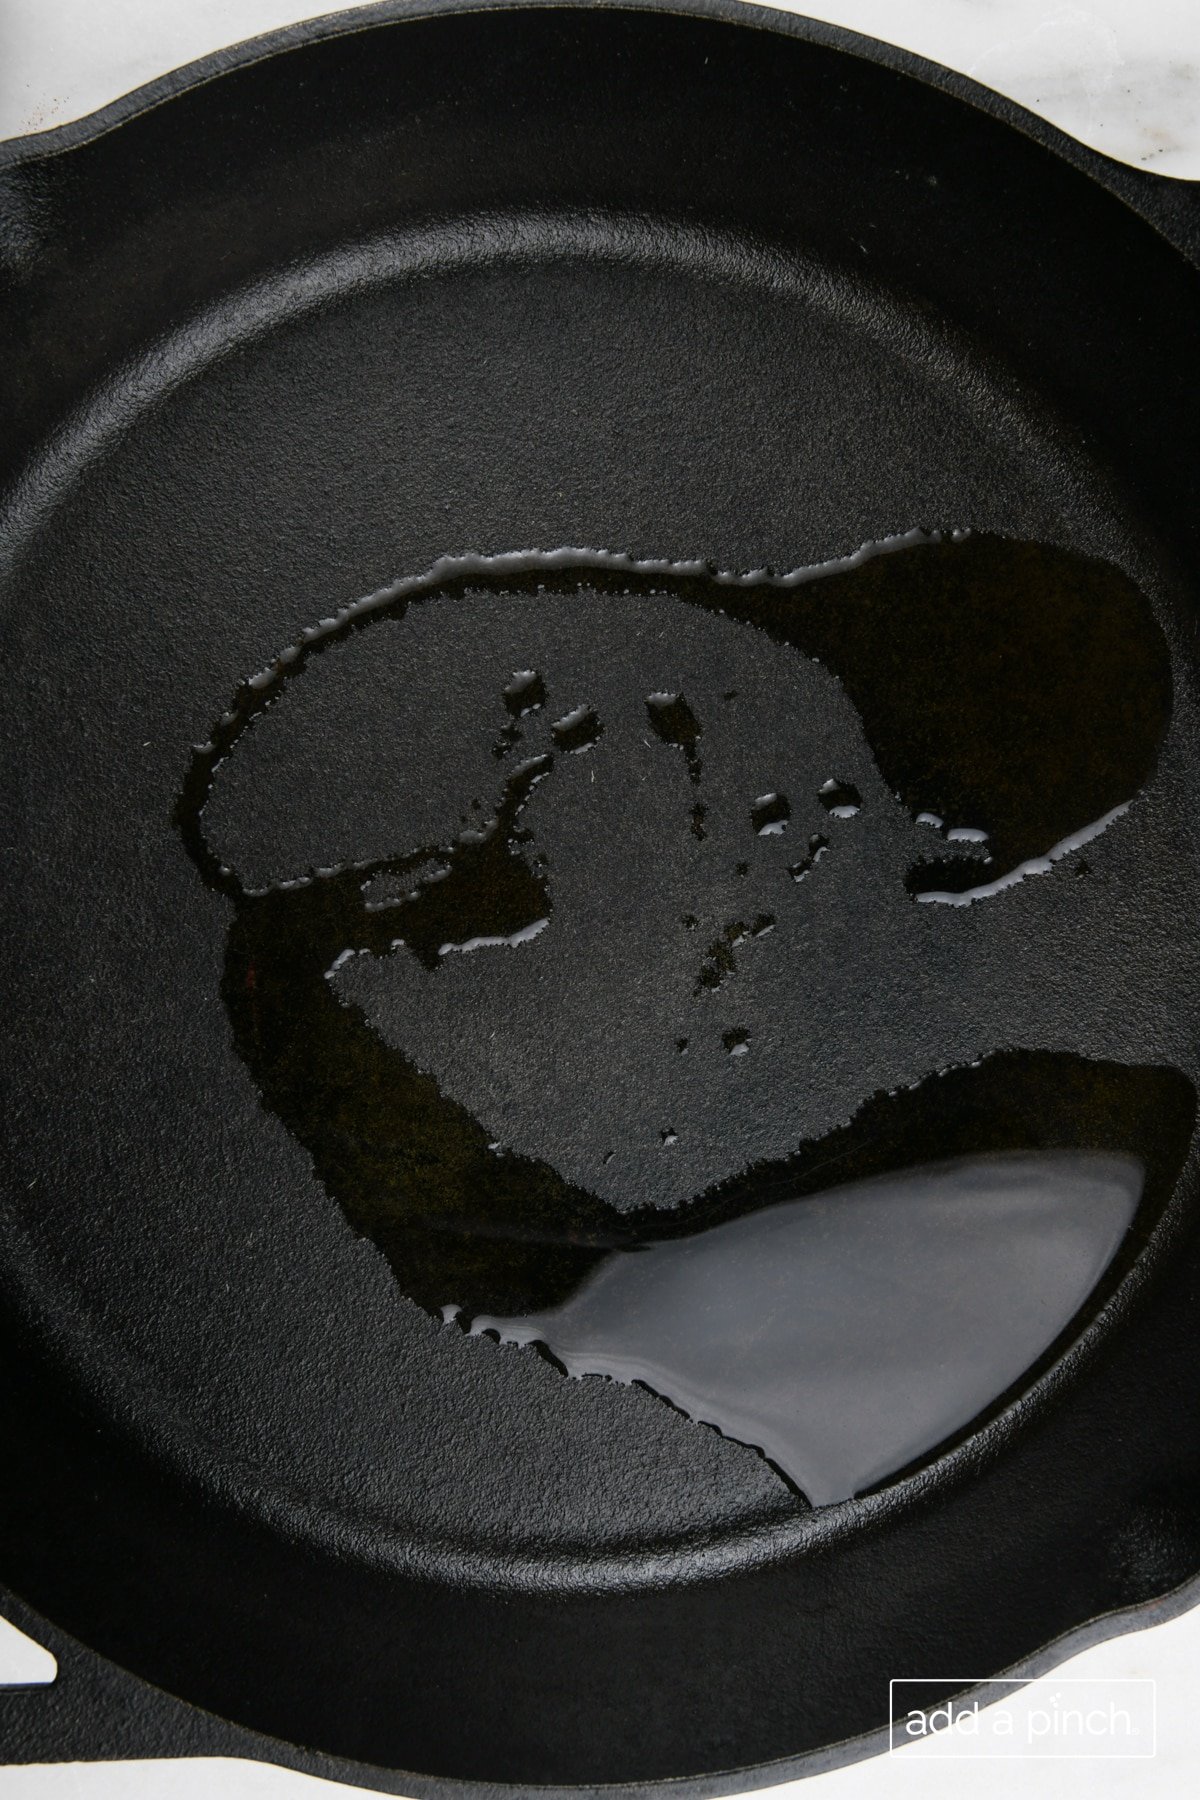 Olive oil added to a cast iron skillet.